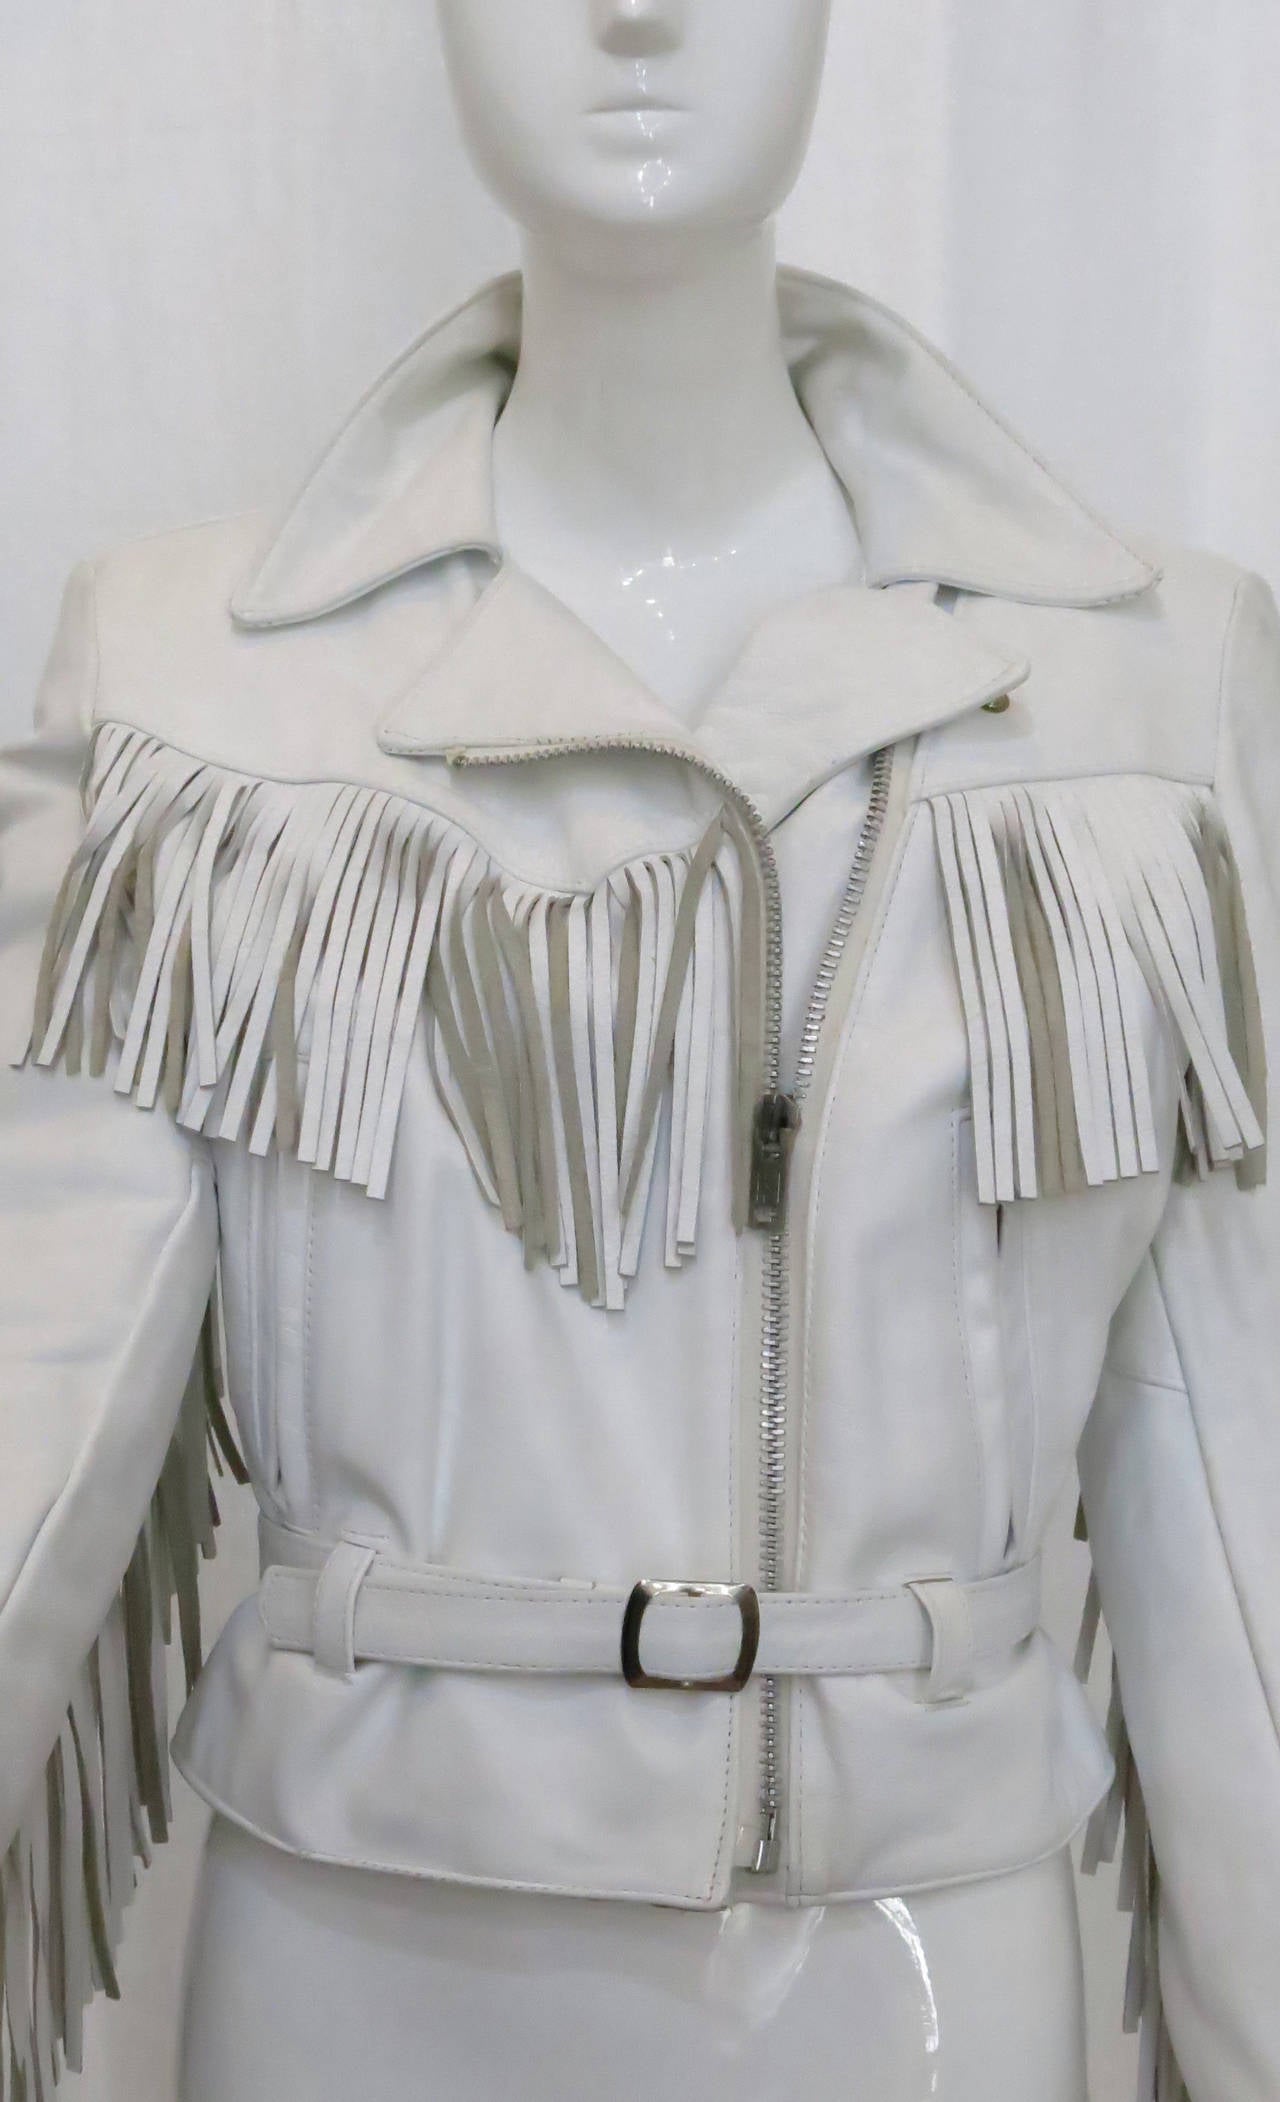 Born to be wild. This white leather fringe motorcycle jacket veers from the pack as a timeless, durable piece for your outerwear wardrobe in eye-catching white. This jacket is heavy duty and cinches at the waist with a belt in the front as well as a